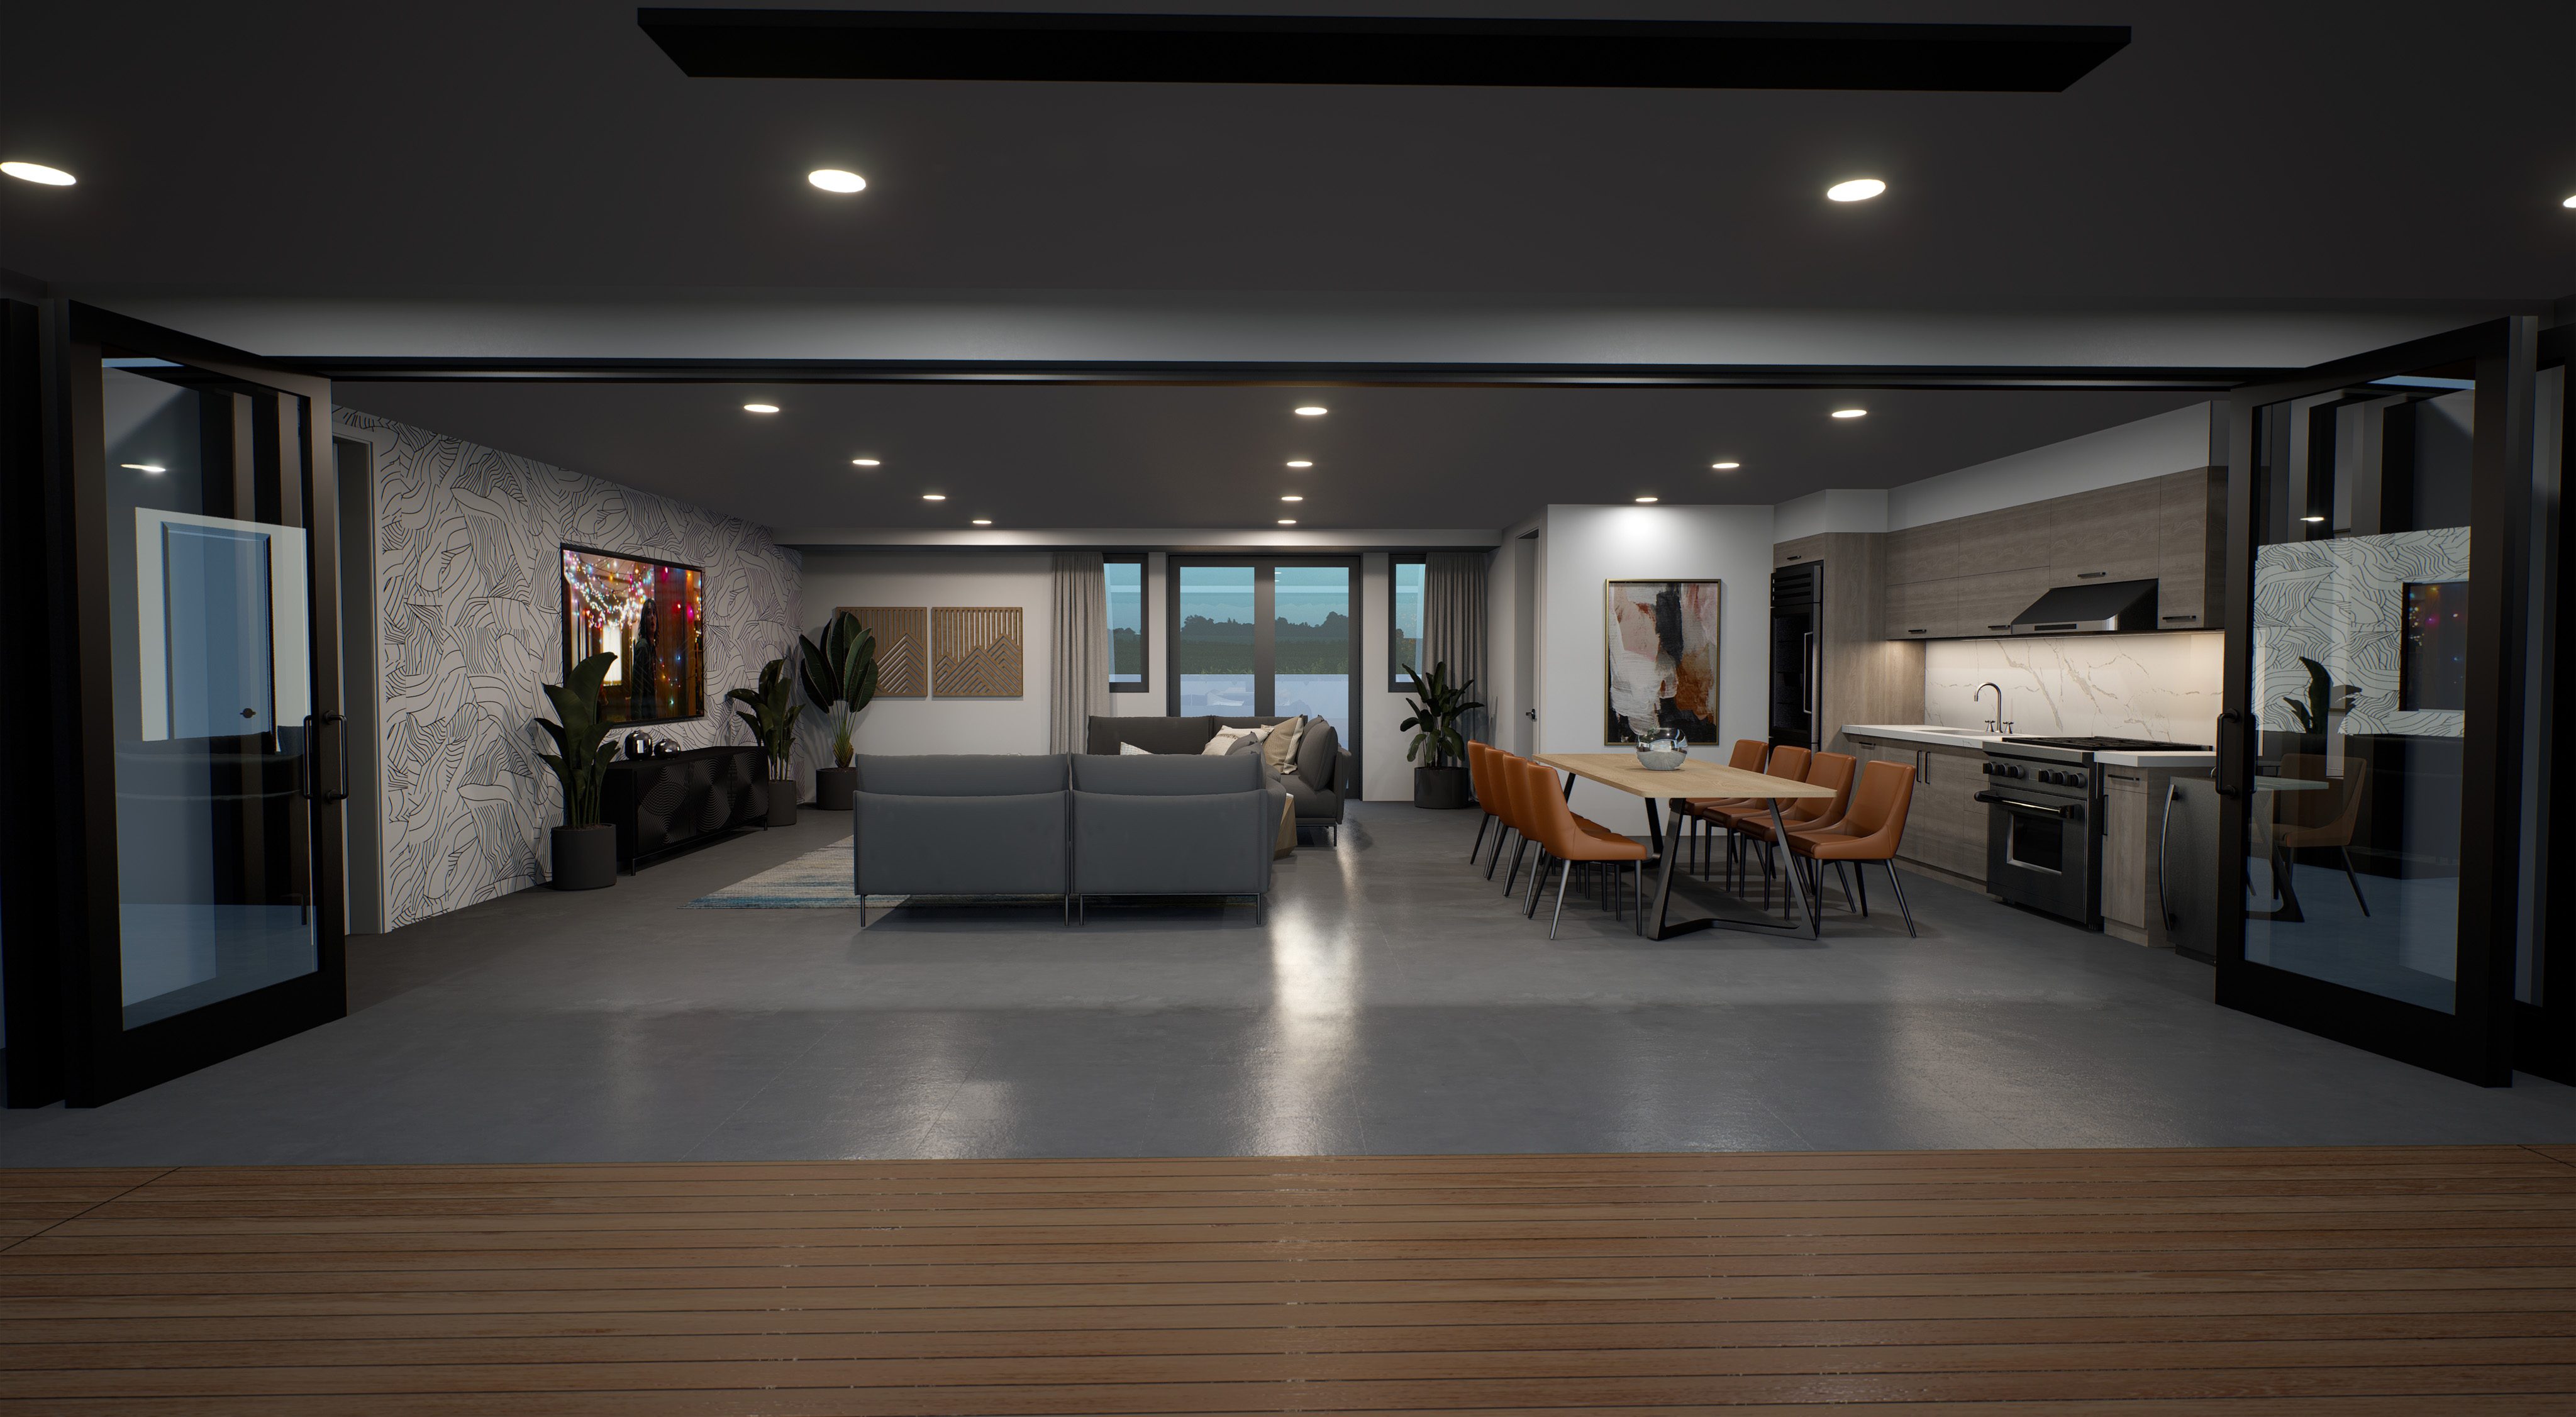 Open lounge/kitchen area with gray couches, brown leather seating at table and kitchenette